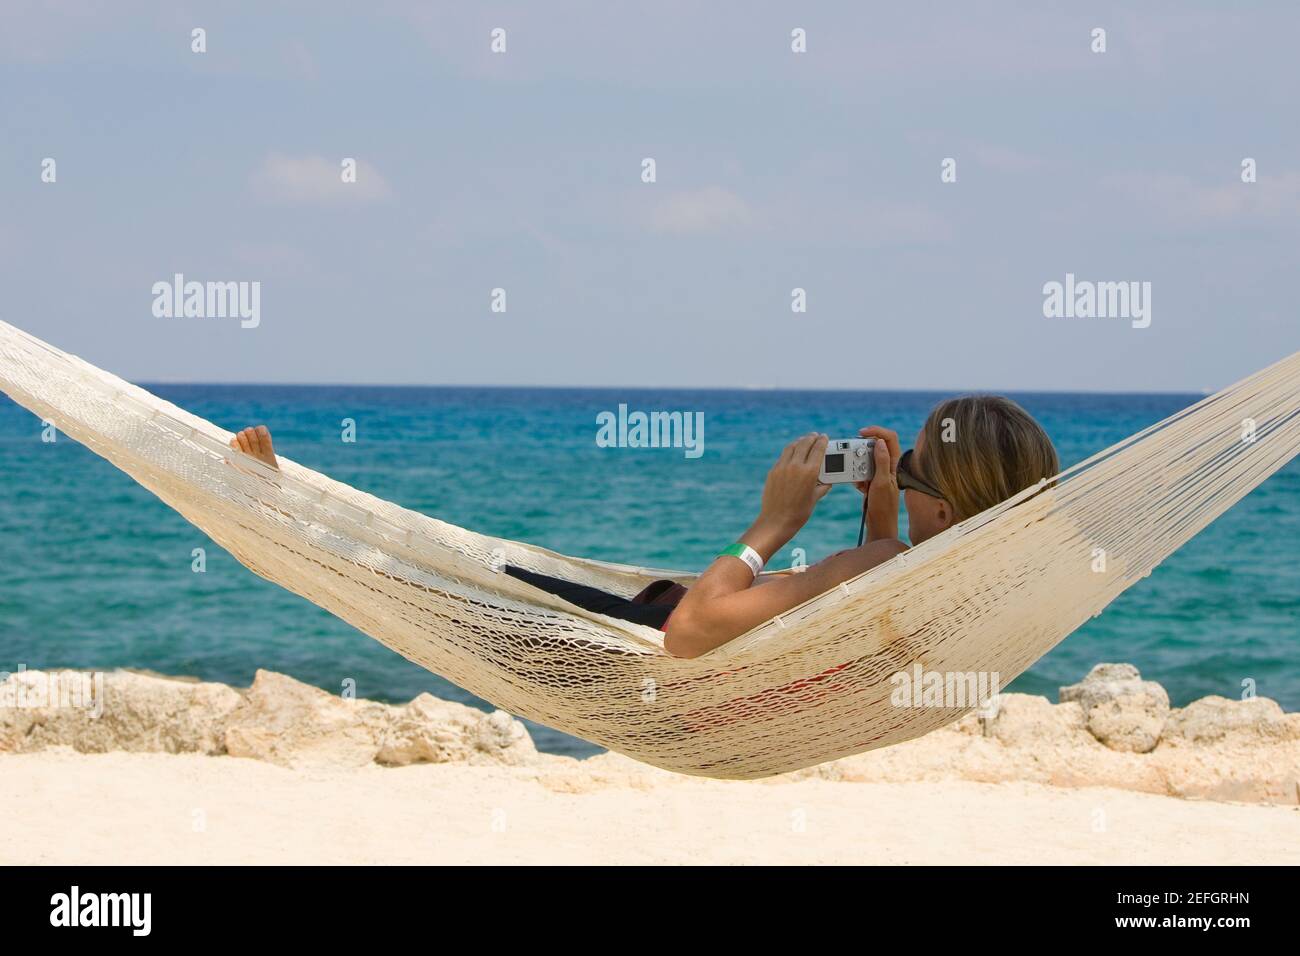 Young woman lying in a hammock and holding a digital camera, Cancun, Mexico Stock Photo